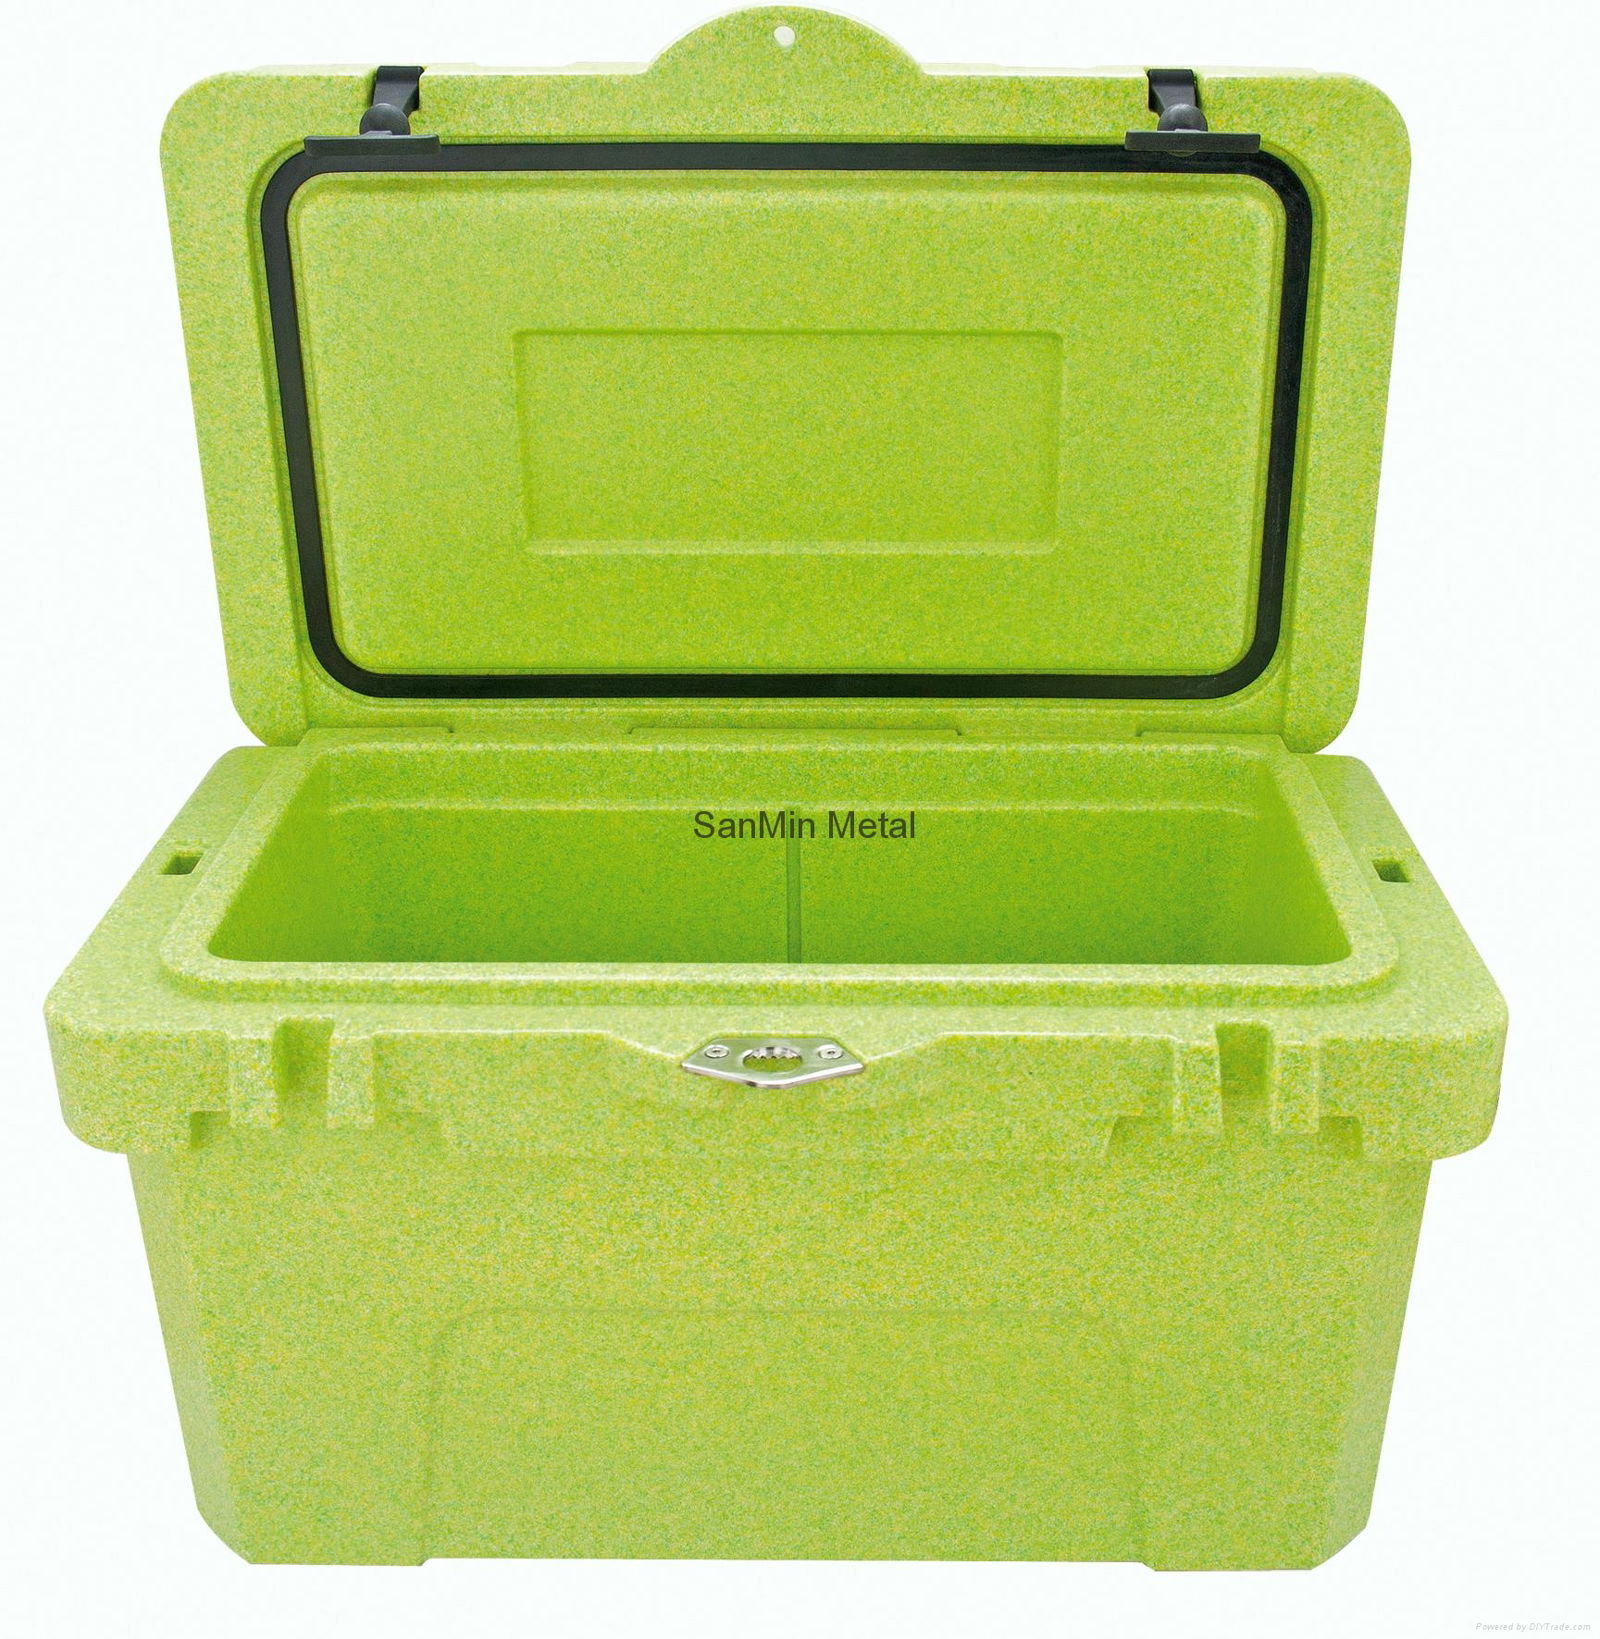 cooler box with thermometer